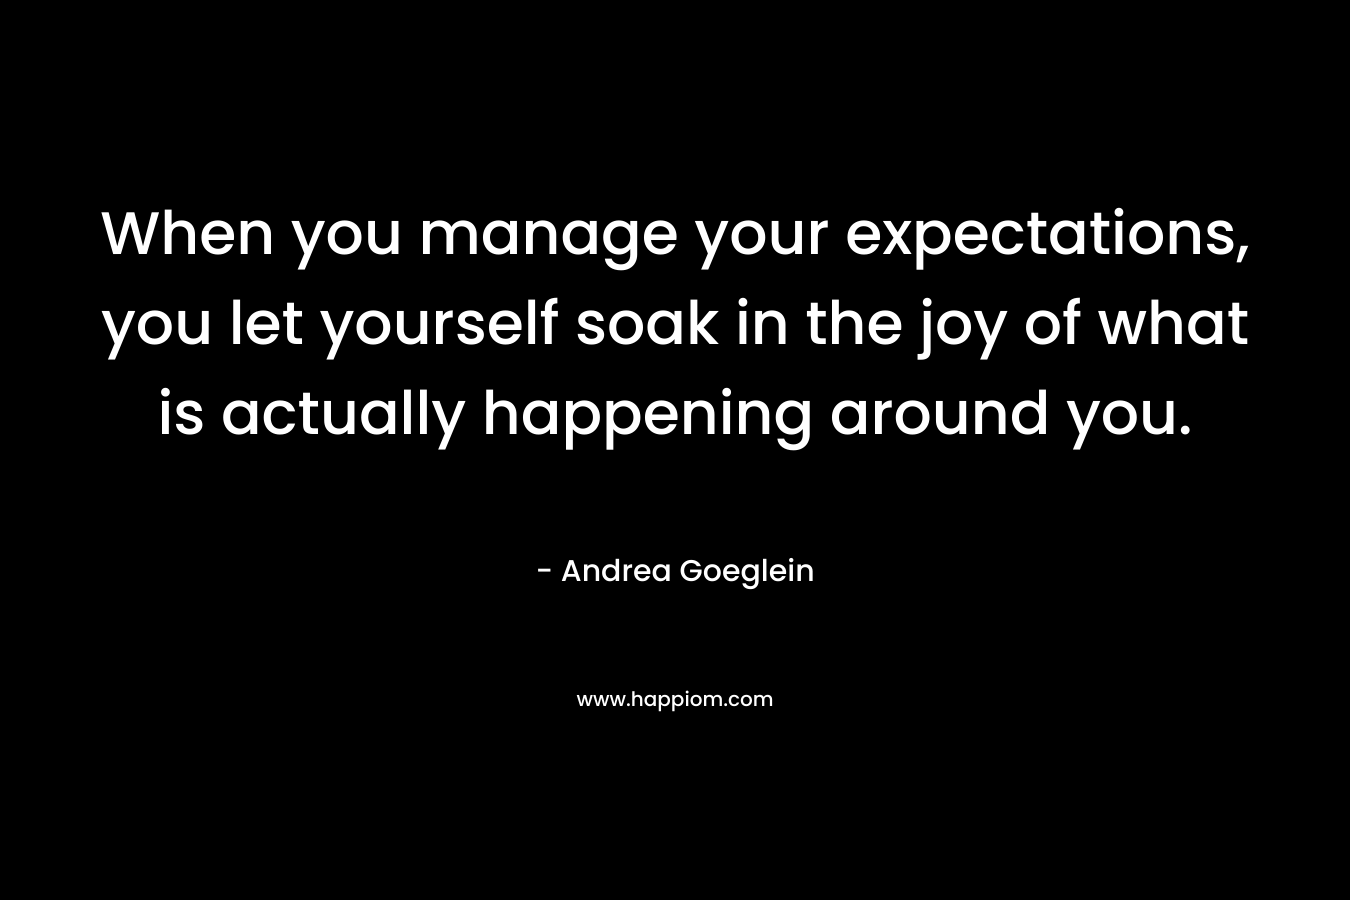 When you manage your expectations, you let yourself soak in the joy of what is actually happening around you.